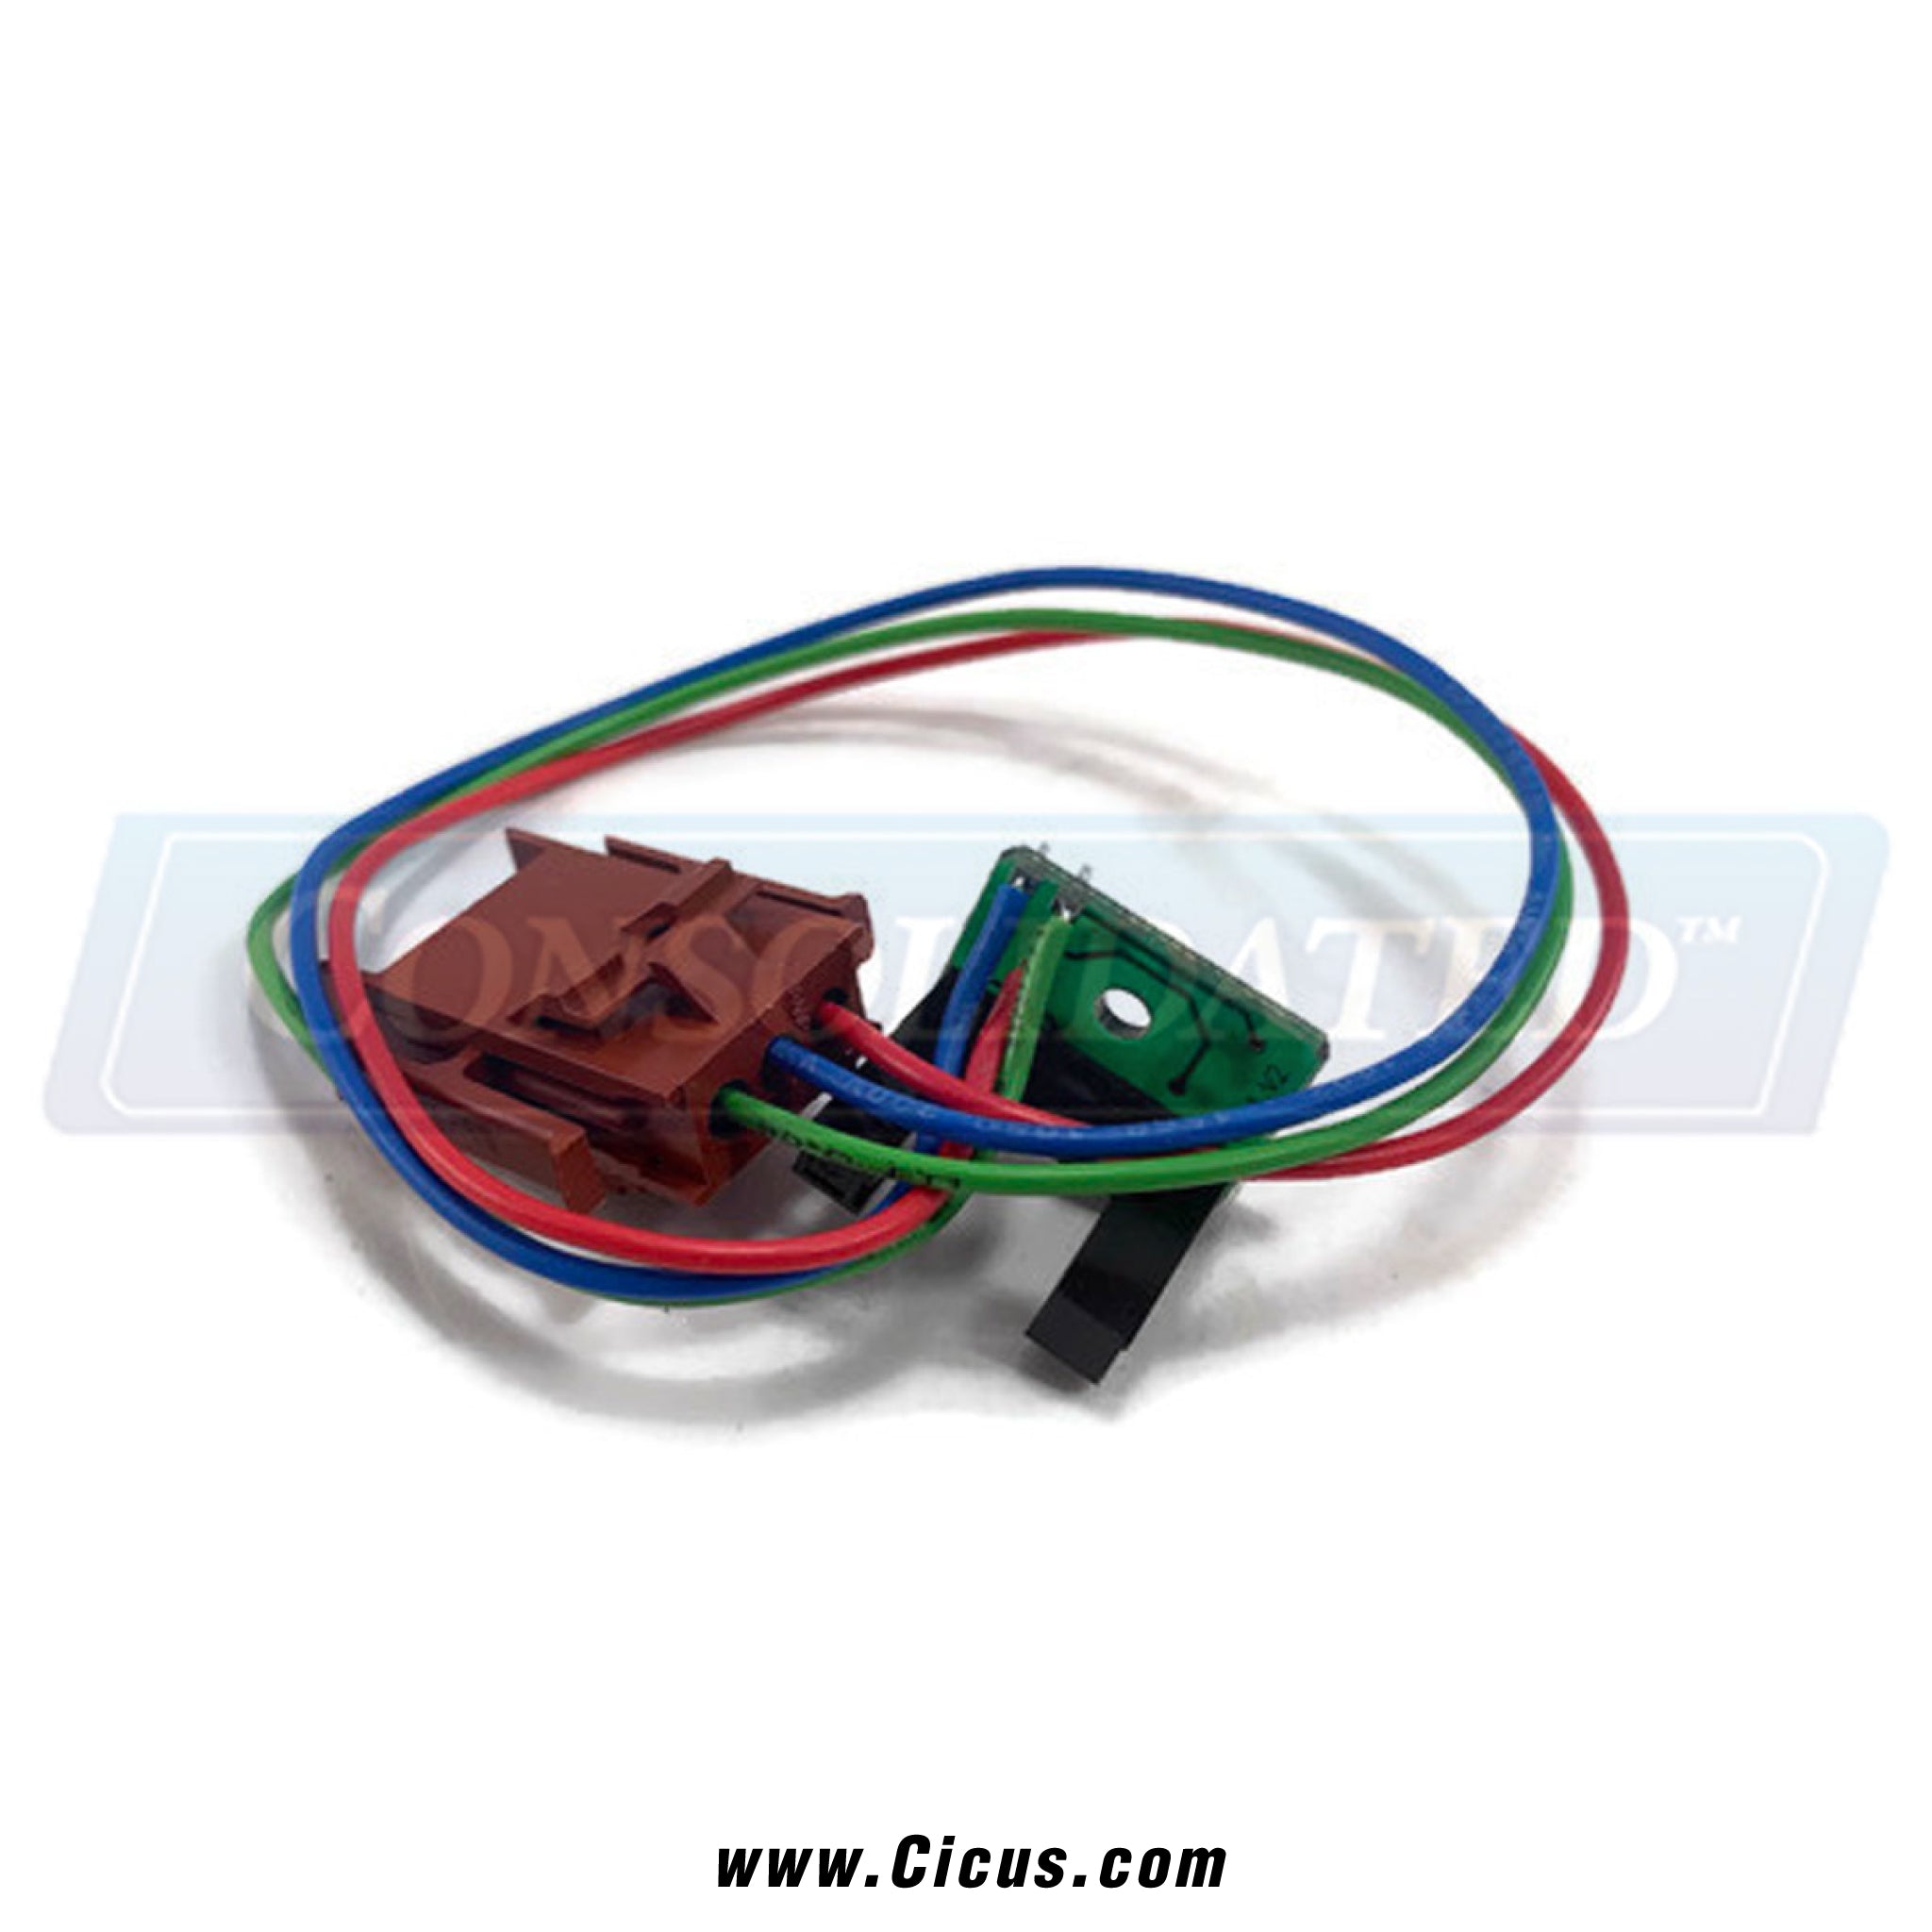 ADC PCB Optic Switch Assembly [881143]. - Front View